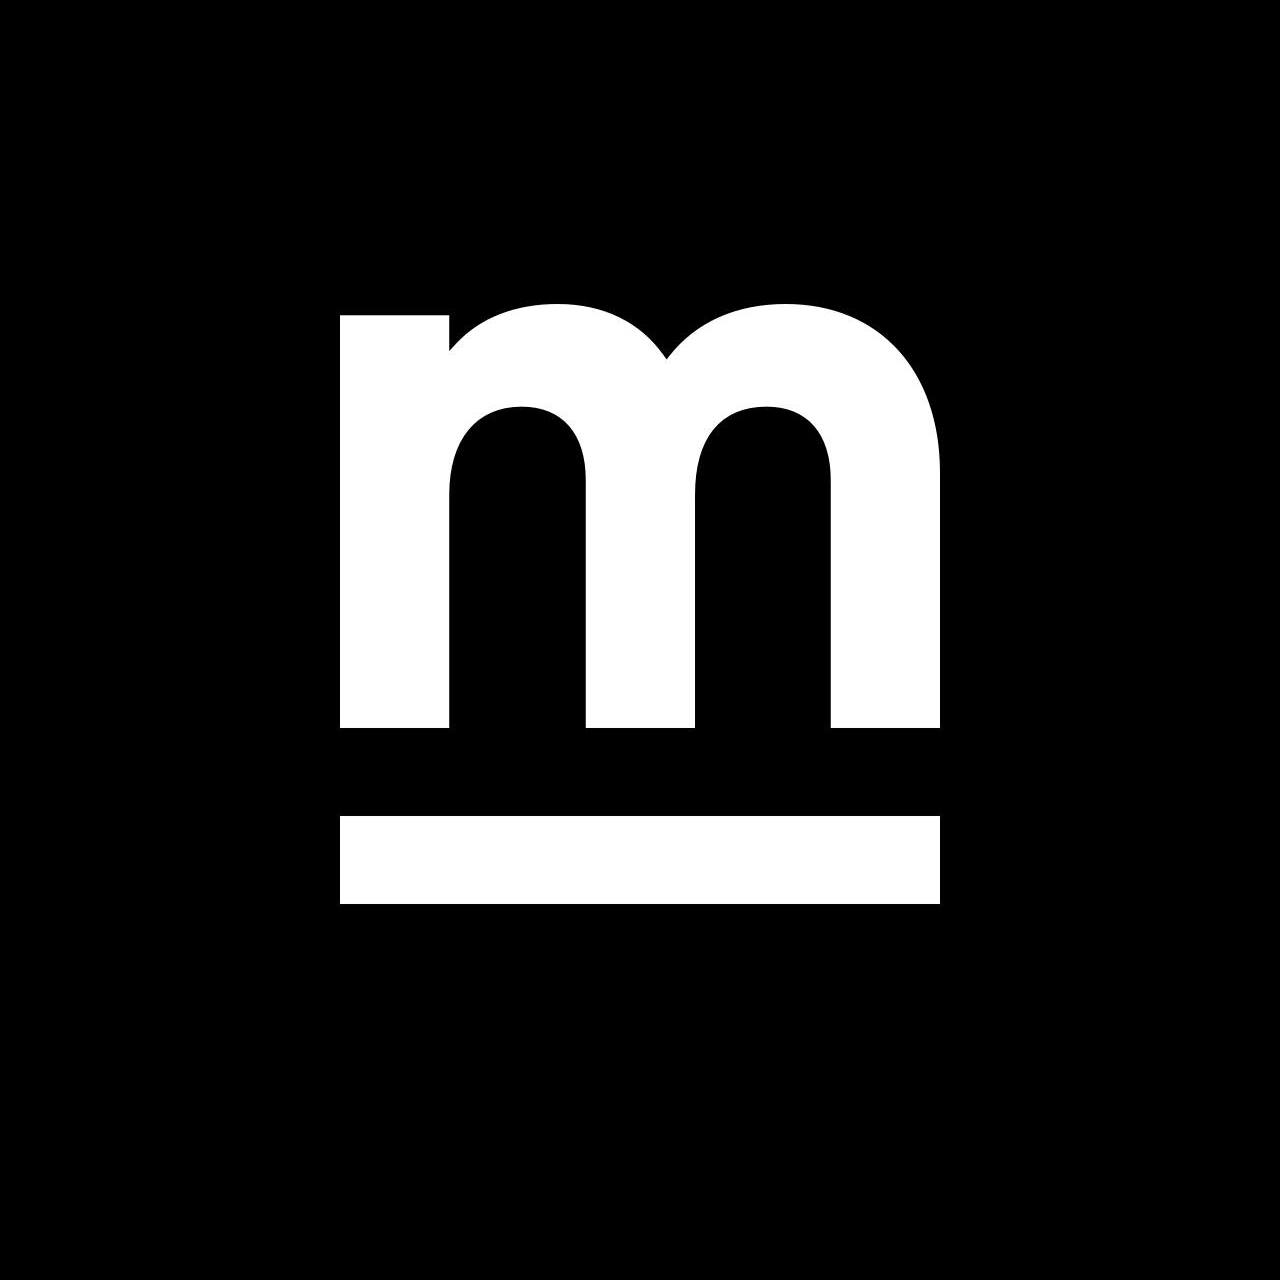 Business logo of Mabbly